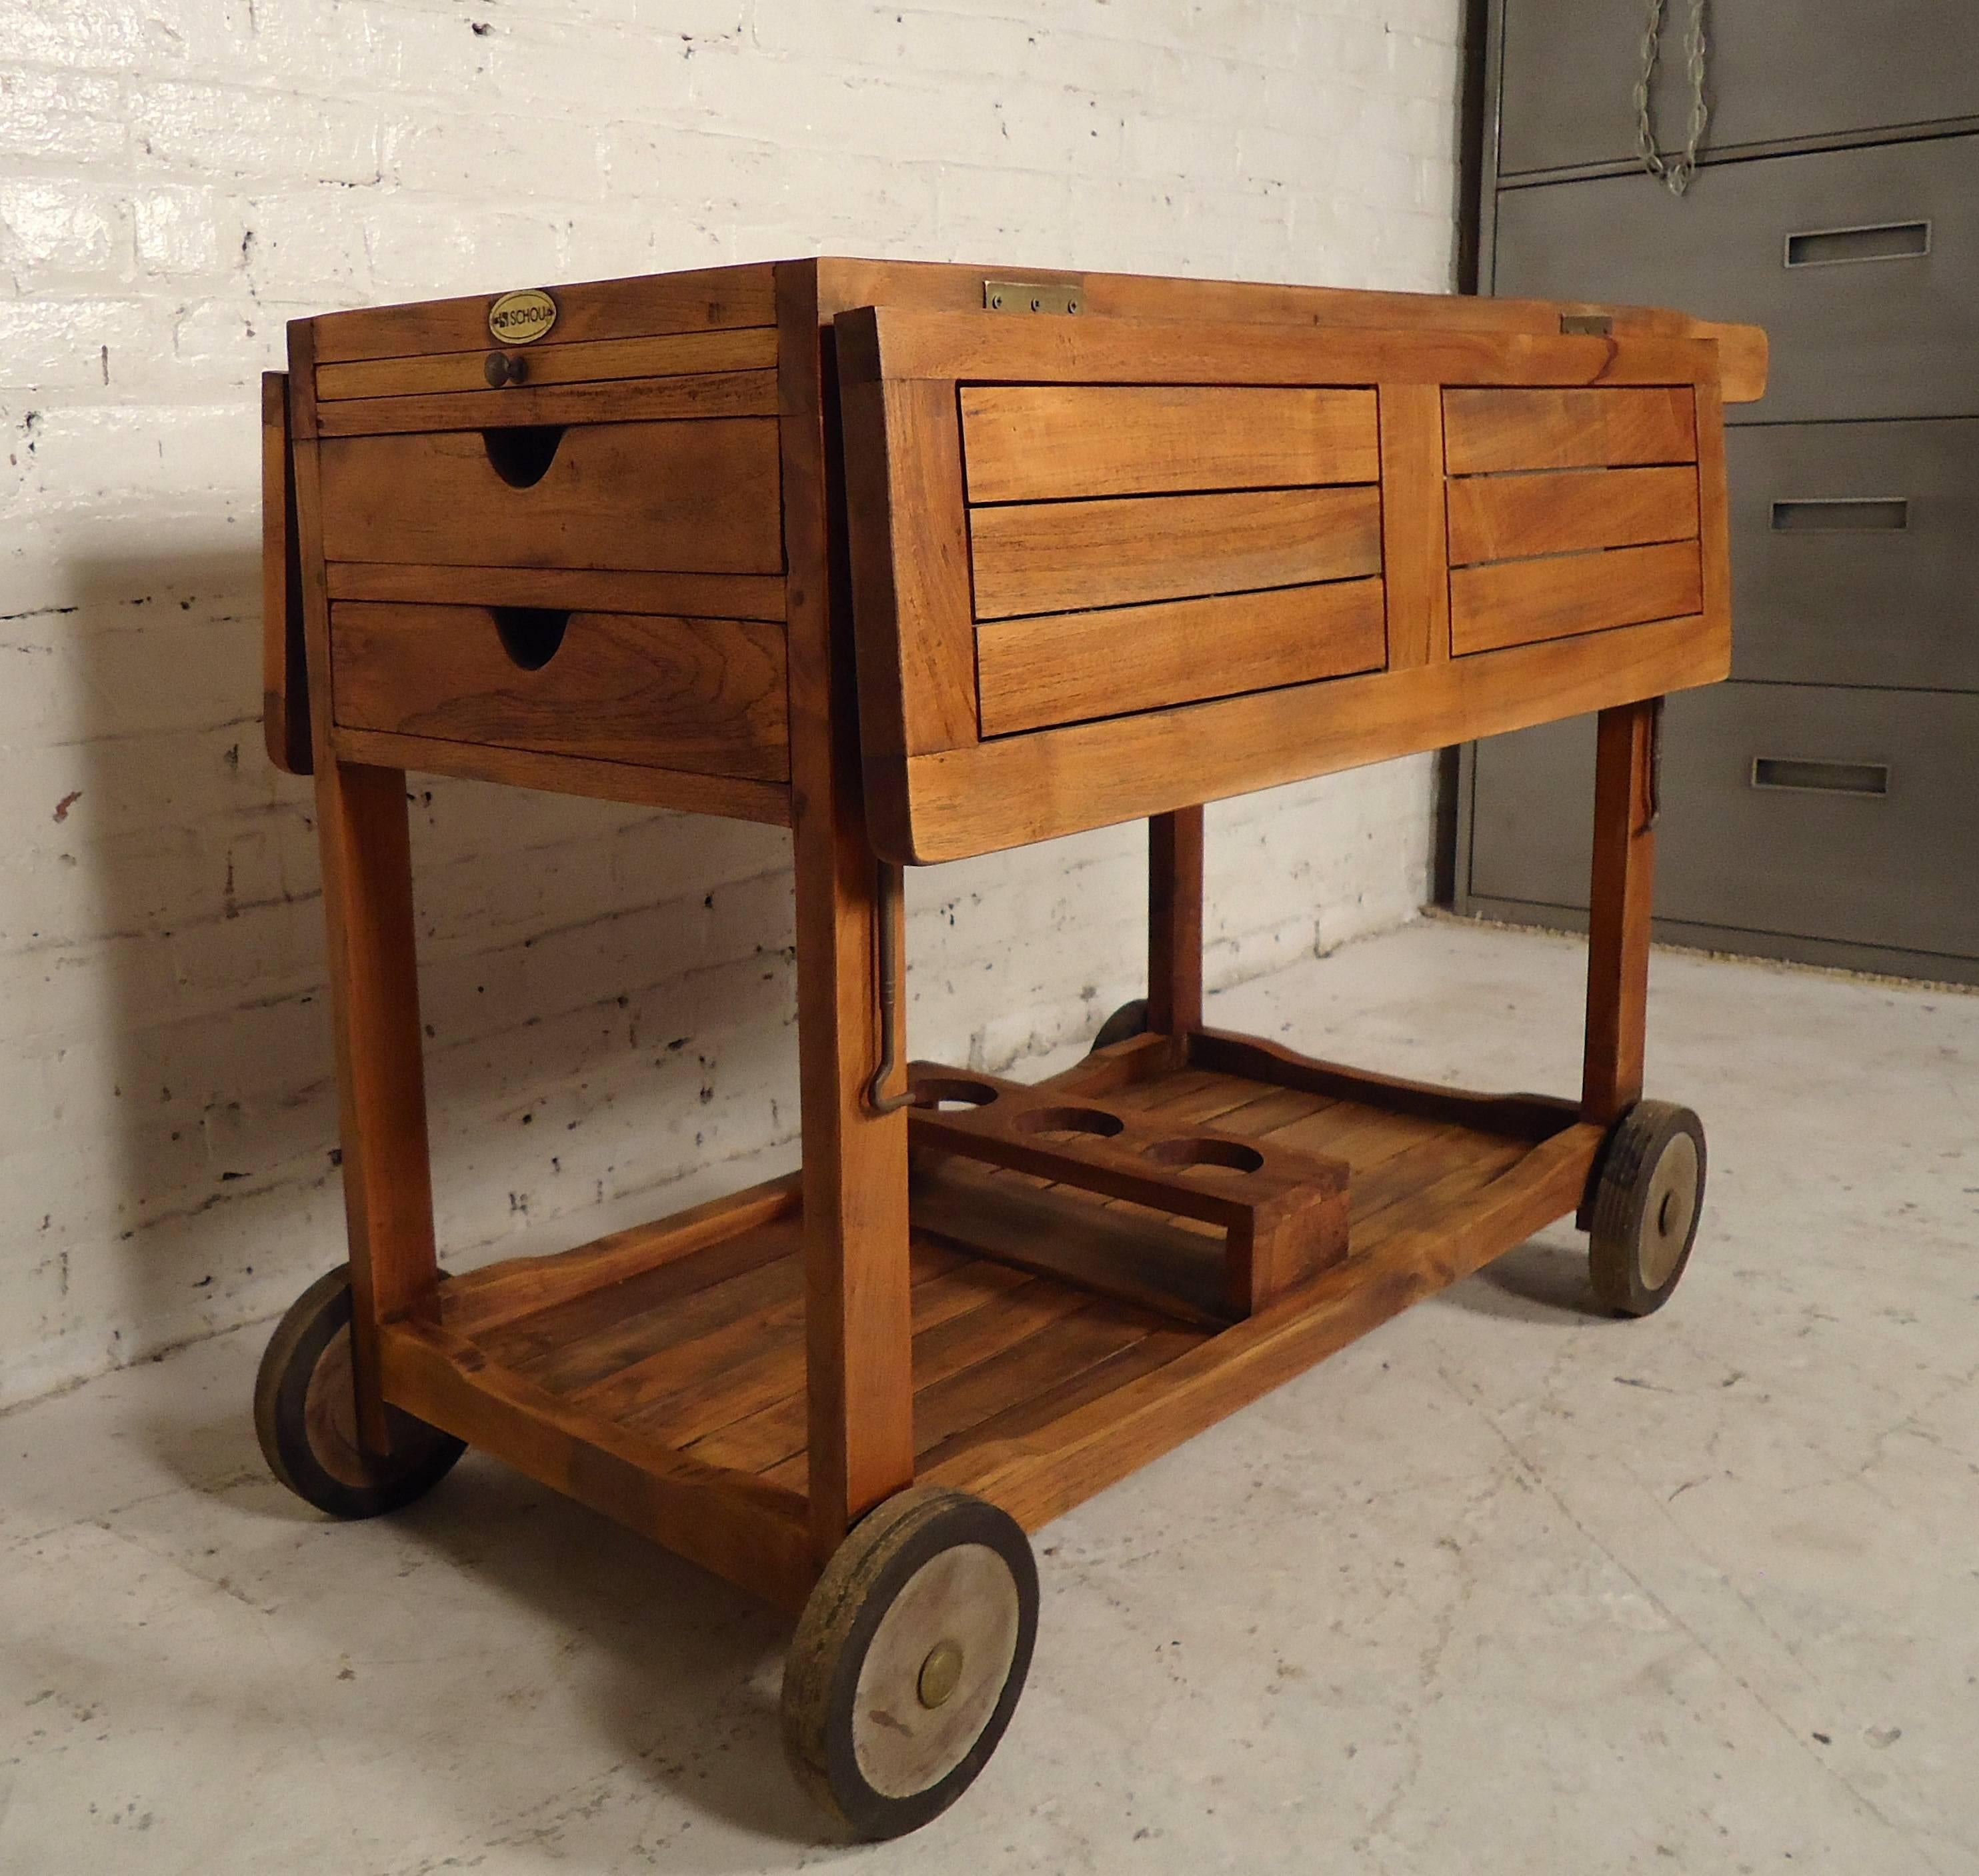 Rustic vintage-modern serving cart featuring two extending drop leafs, two small drawers for storage use, a cutting board, and bottle holders at the bottom tier. This cart is on a set of four wheels making it easy to maneuver.
Each leaf: 9.5